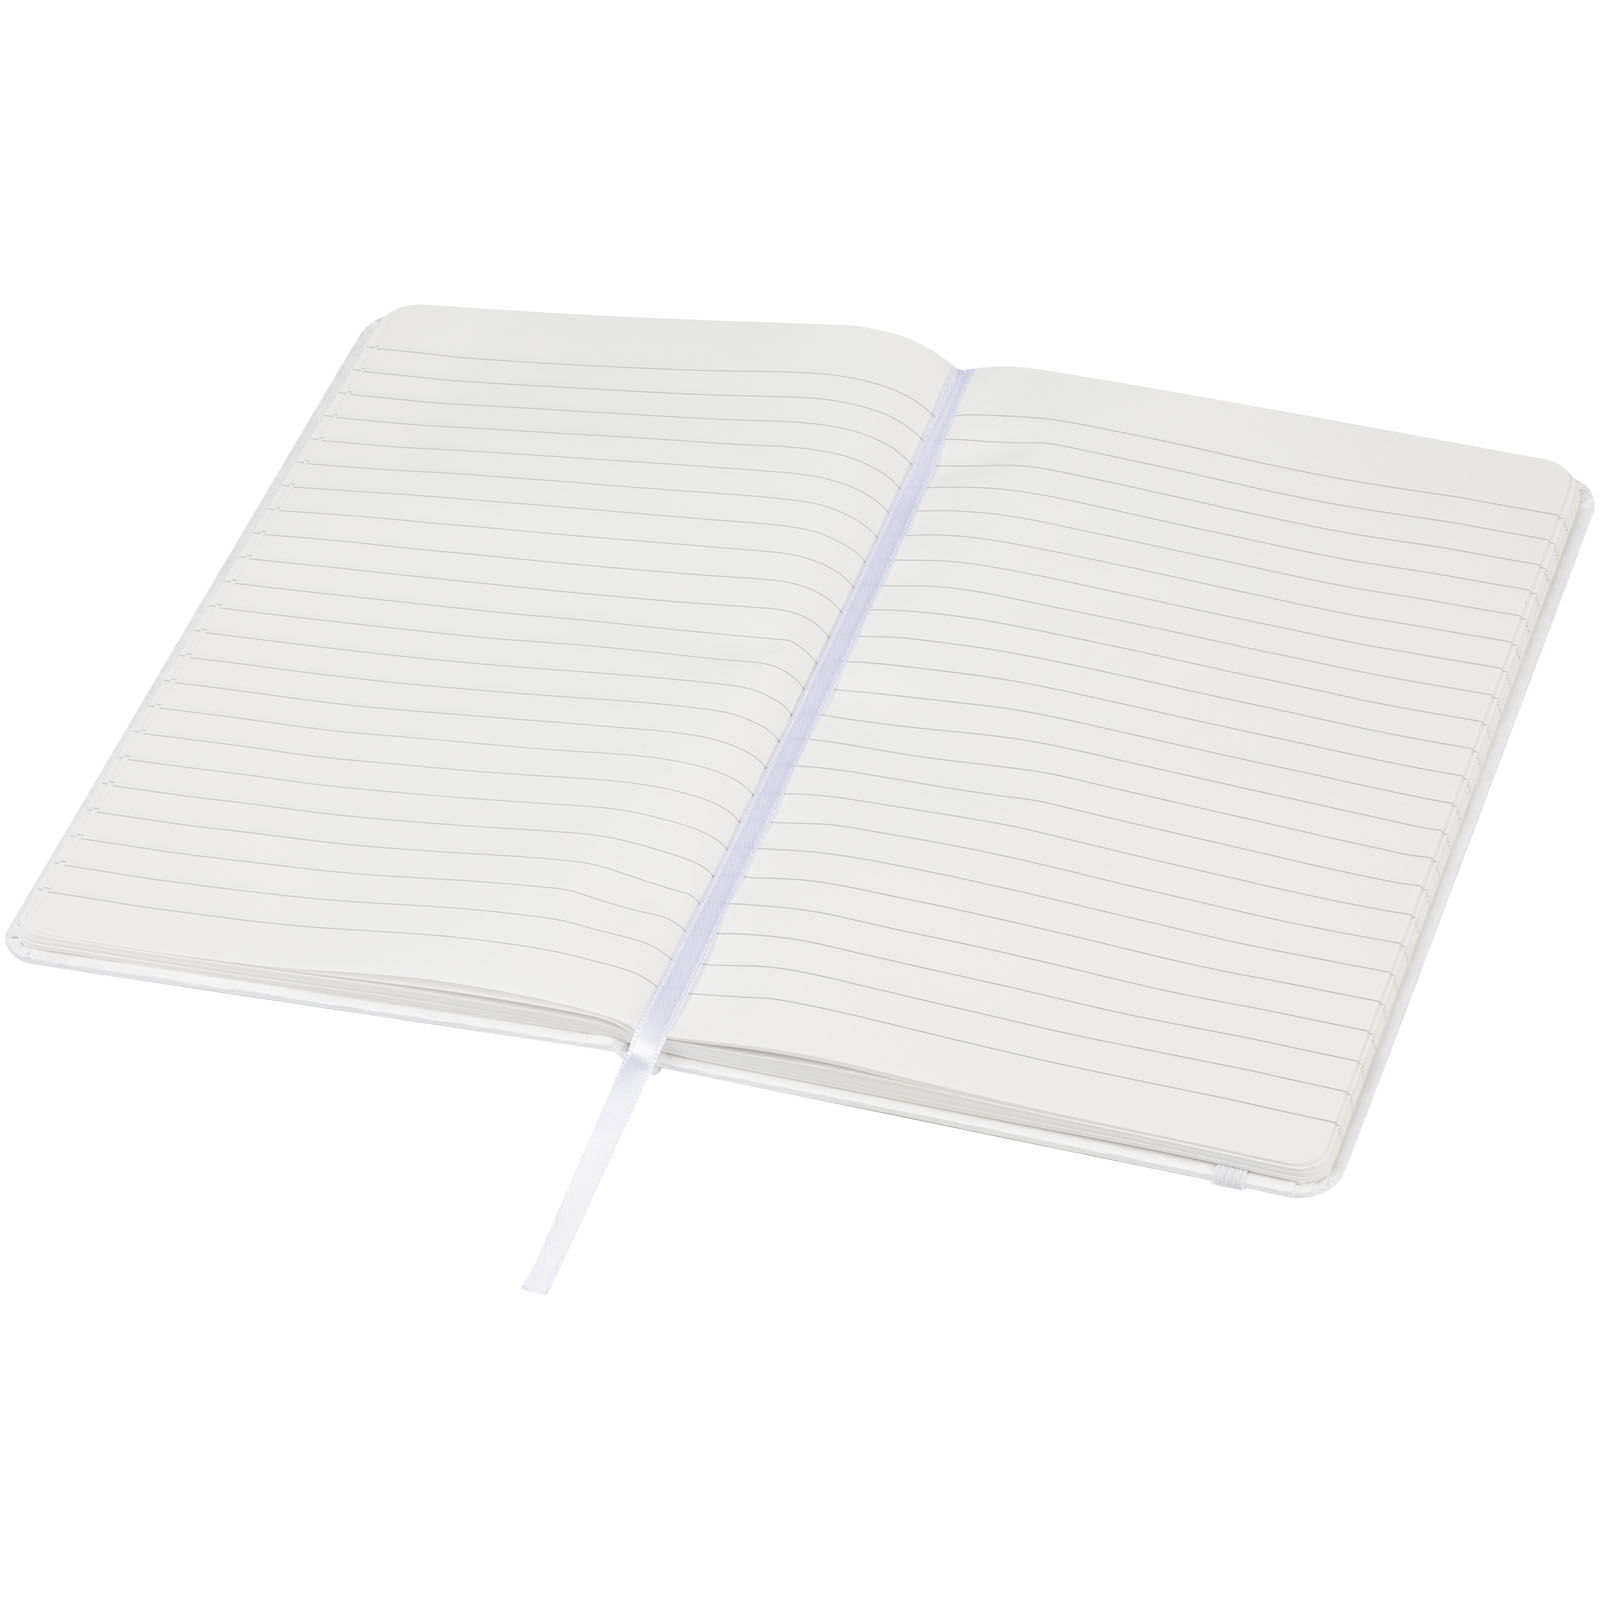 Advertising Hard cover notebooks - Breccia A5 stone paper notebook - 3